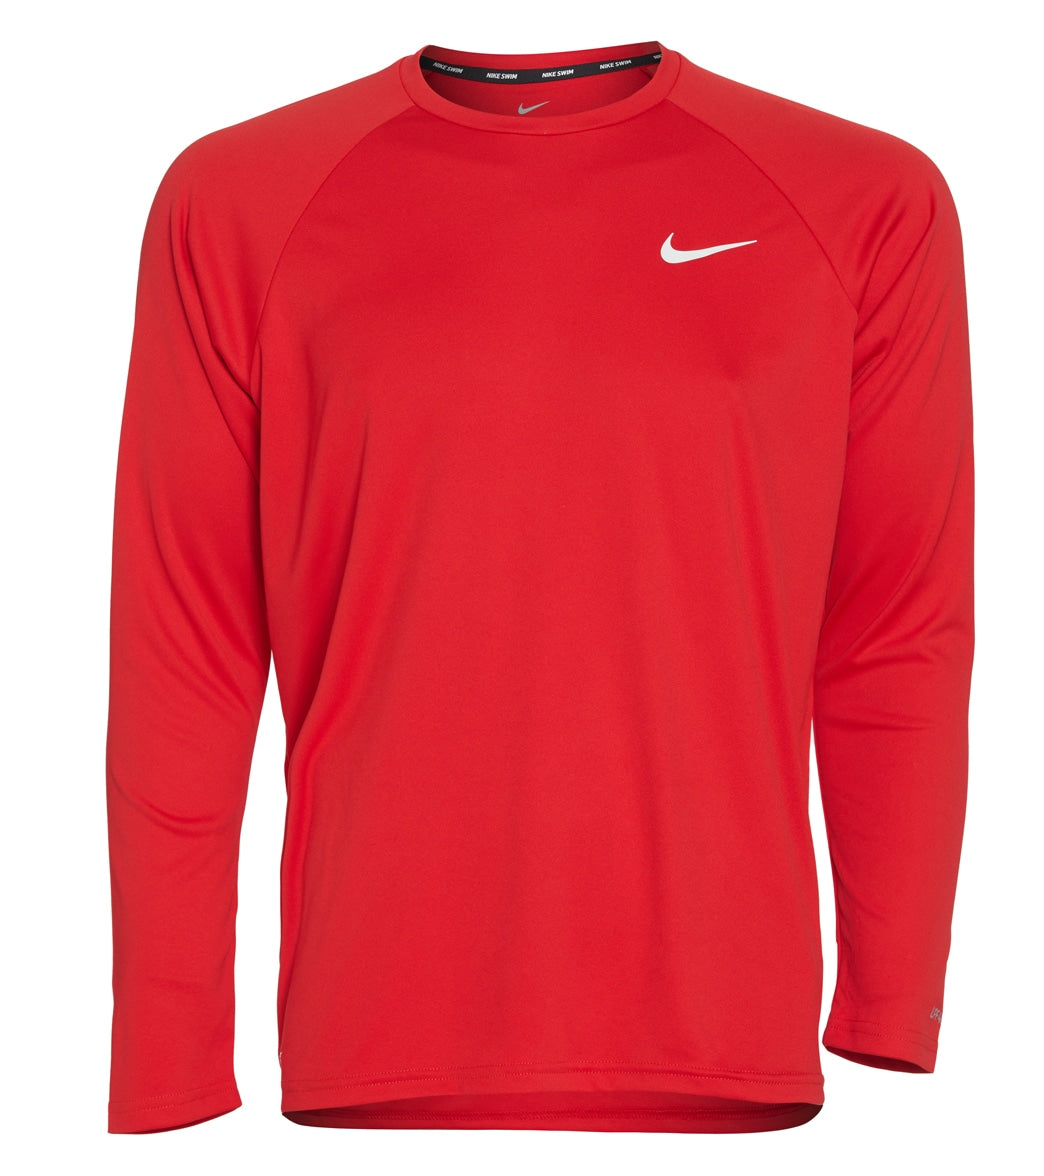 Nike Men's Essential Long Sleeve Hydroguard at SwimOutlet.com